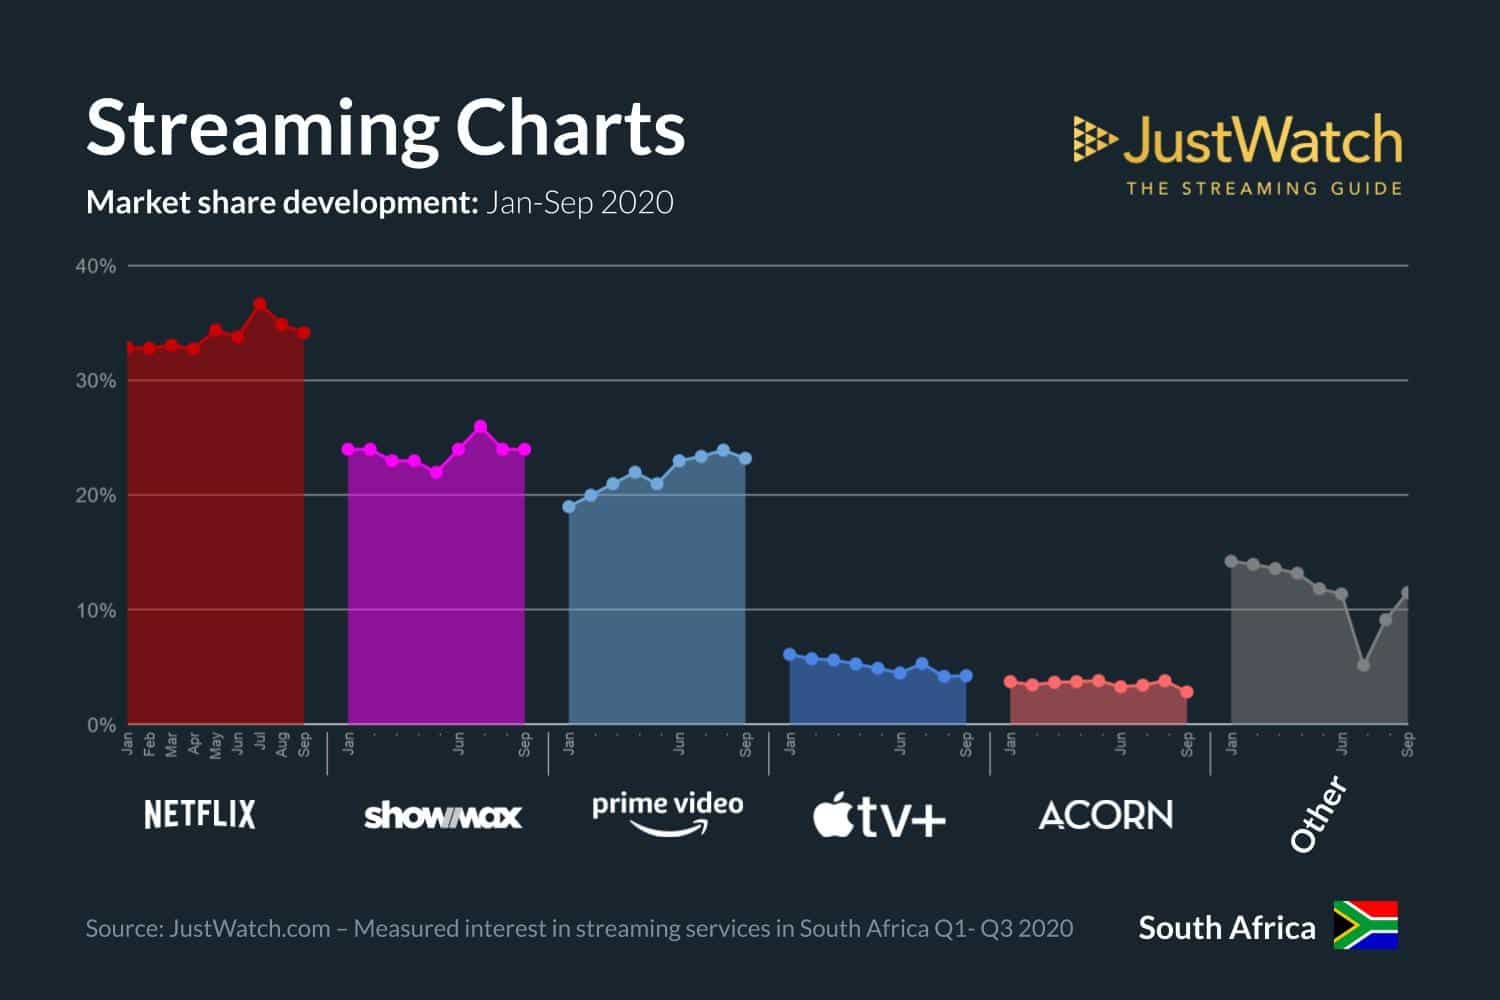 Streaming Charts in Q3 2020